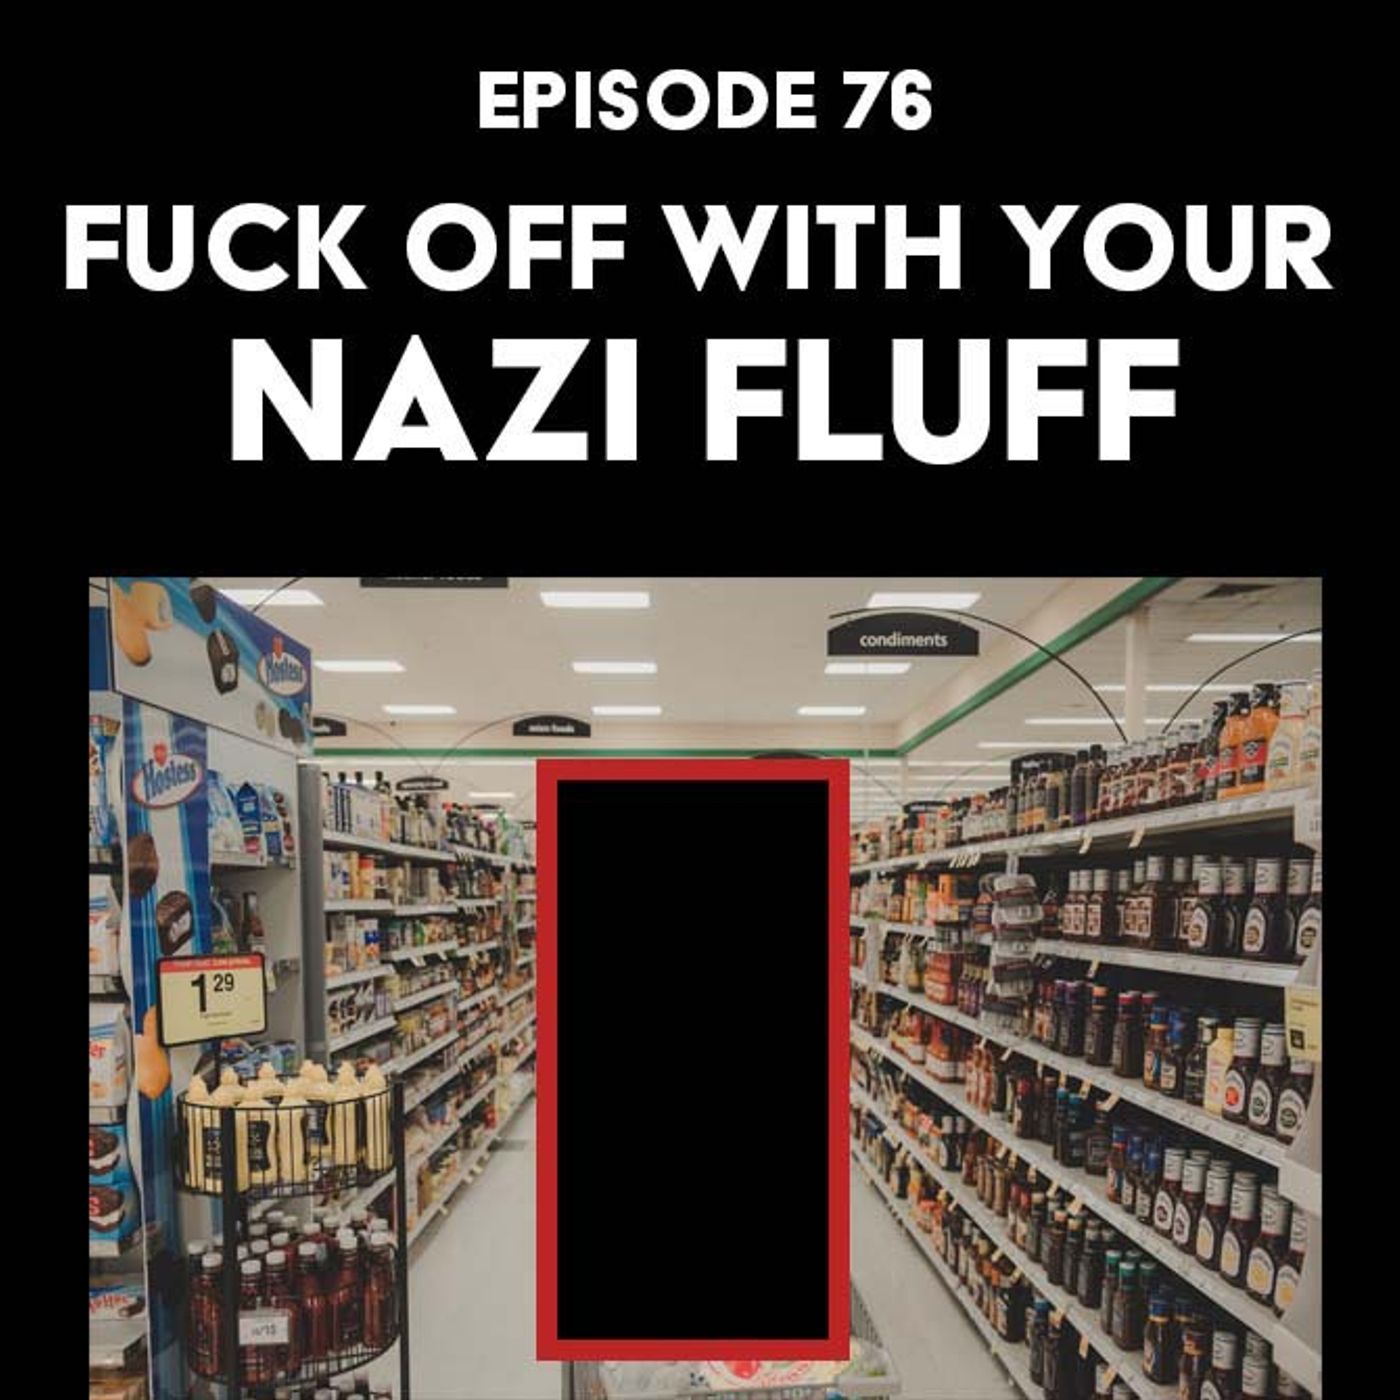 S1 Ep76: Fuck Off With Your Nazi Fluff